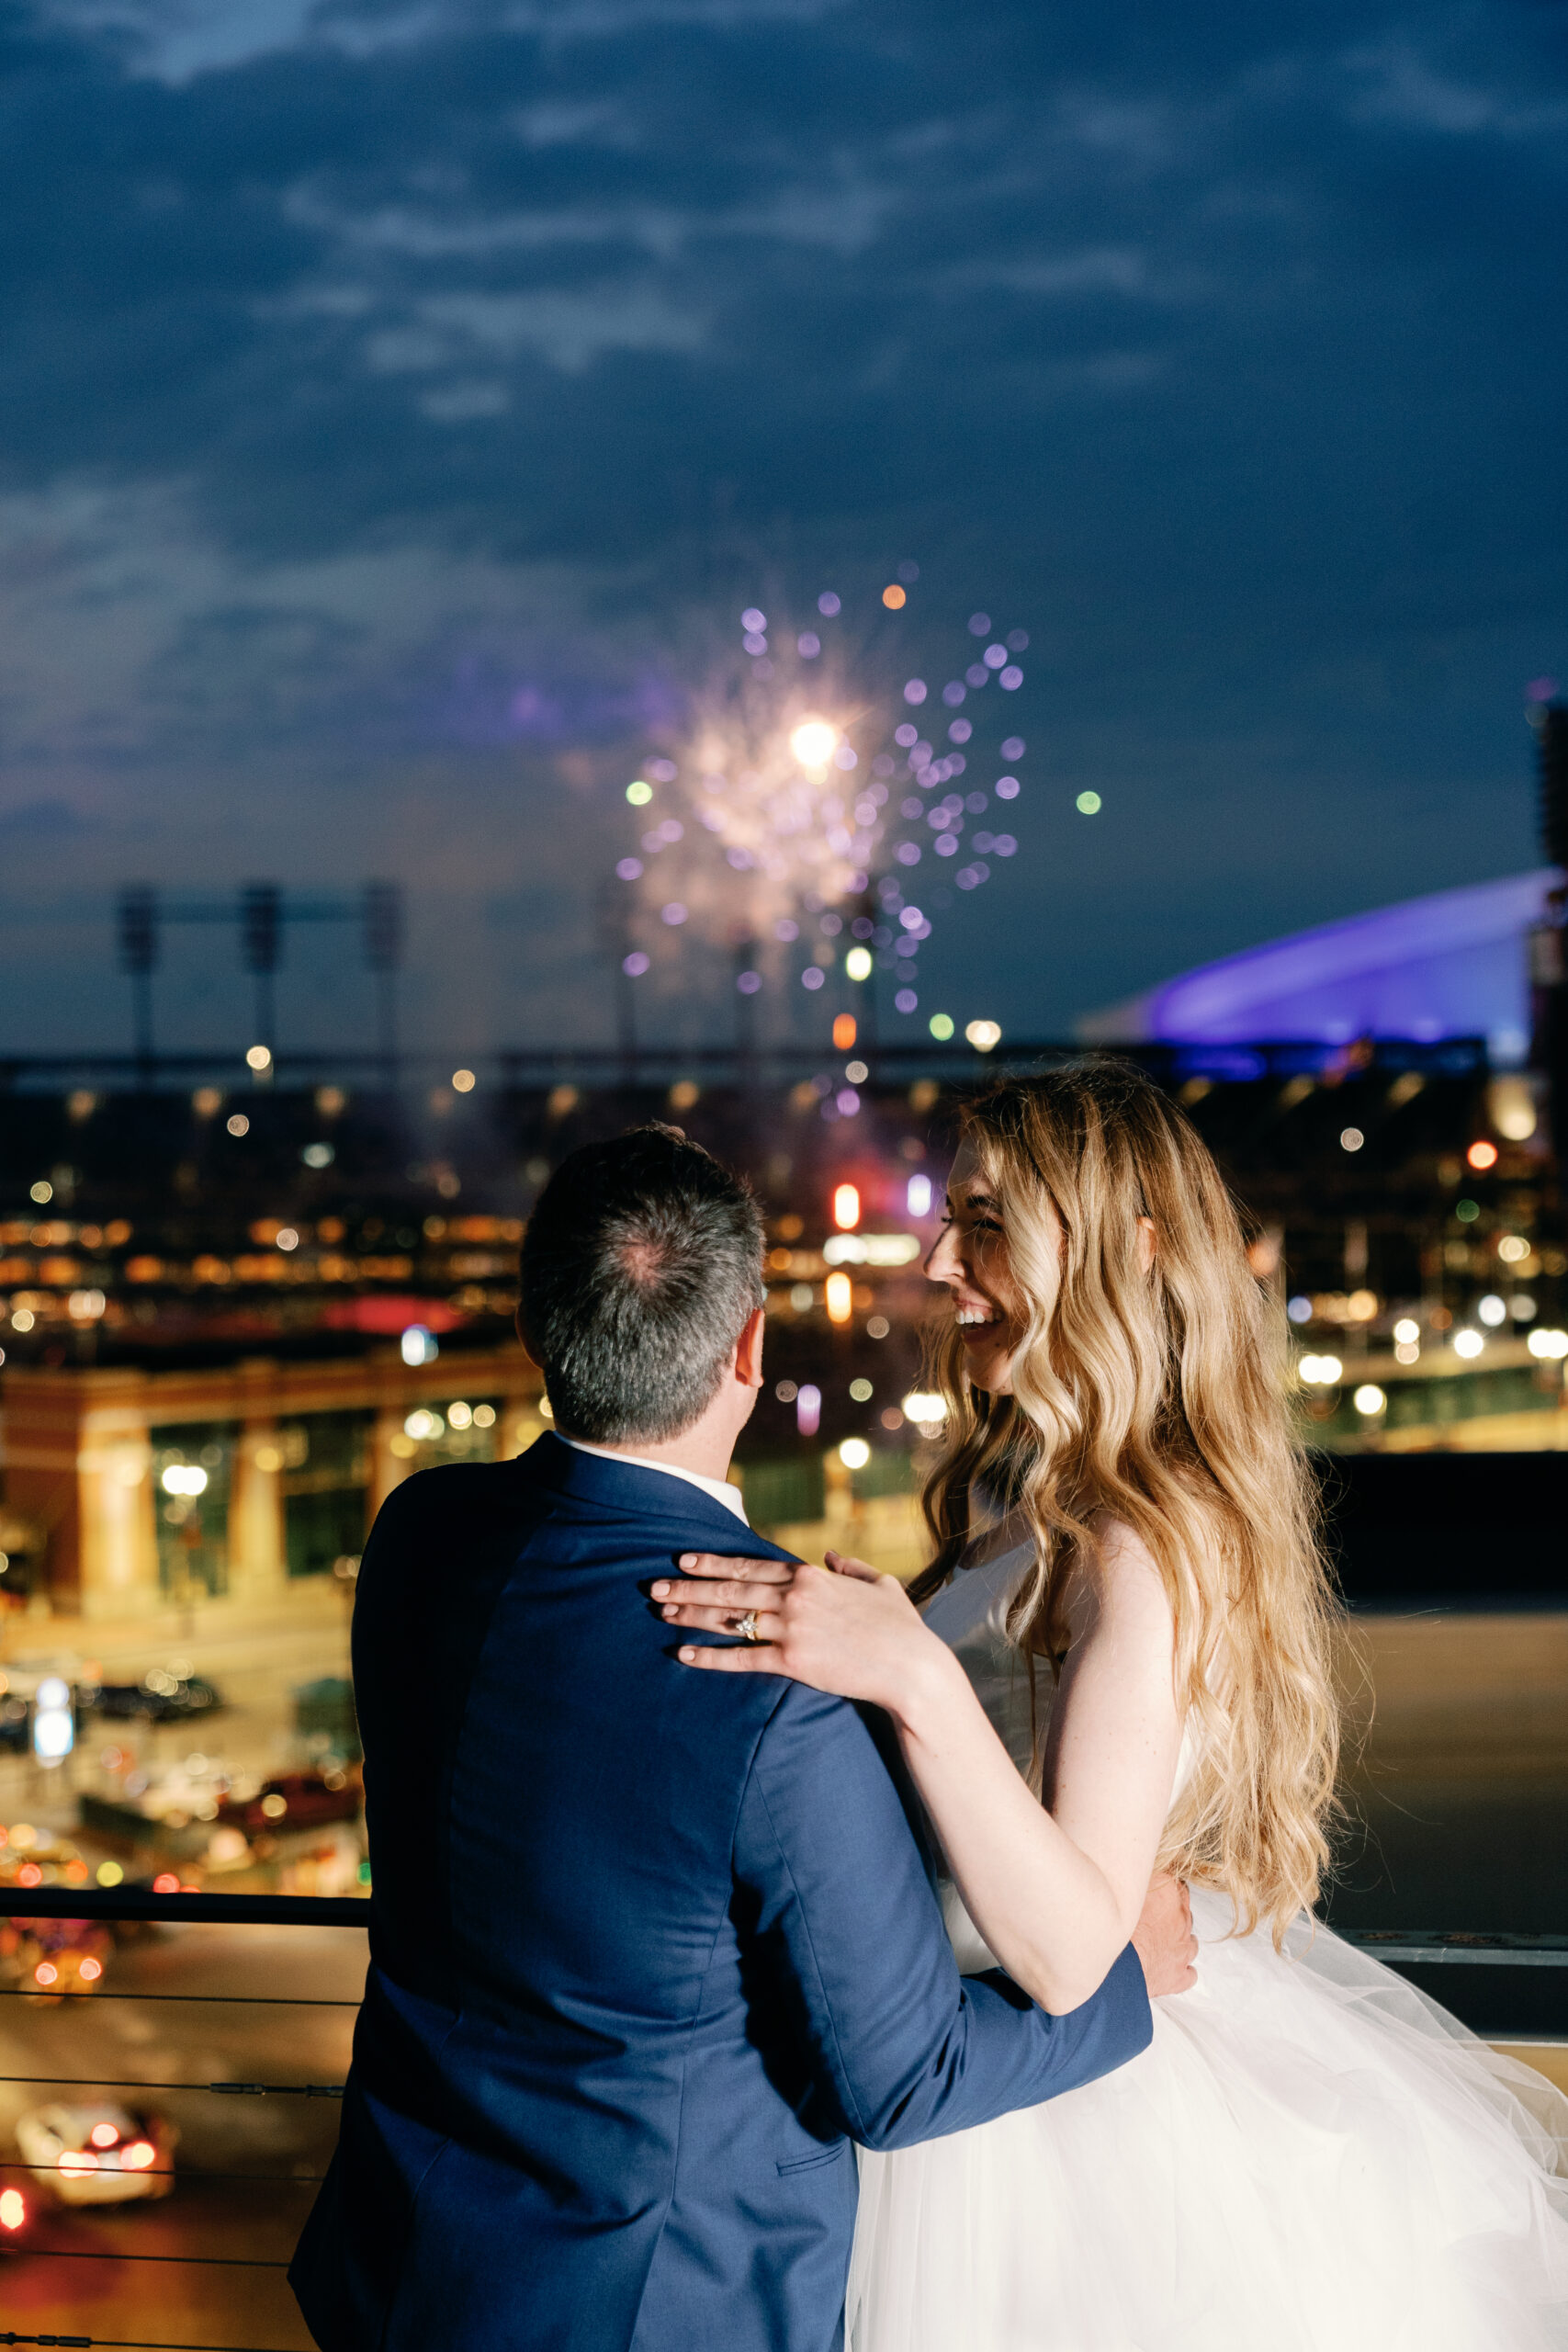 Couture Bride Ashley in Custom Sarah Kolis Gown and veil and groom fireworks